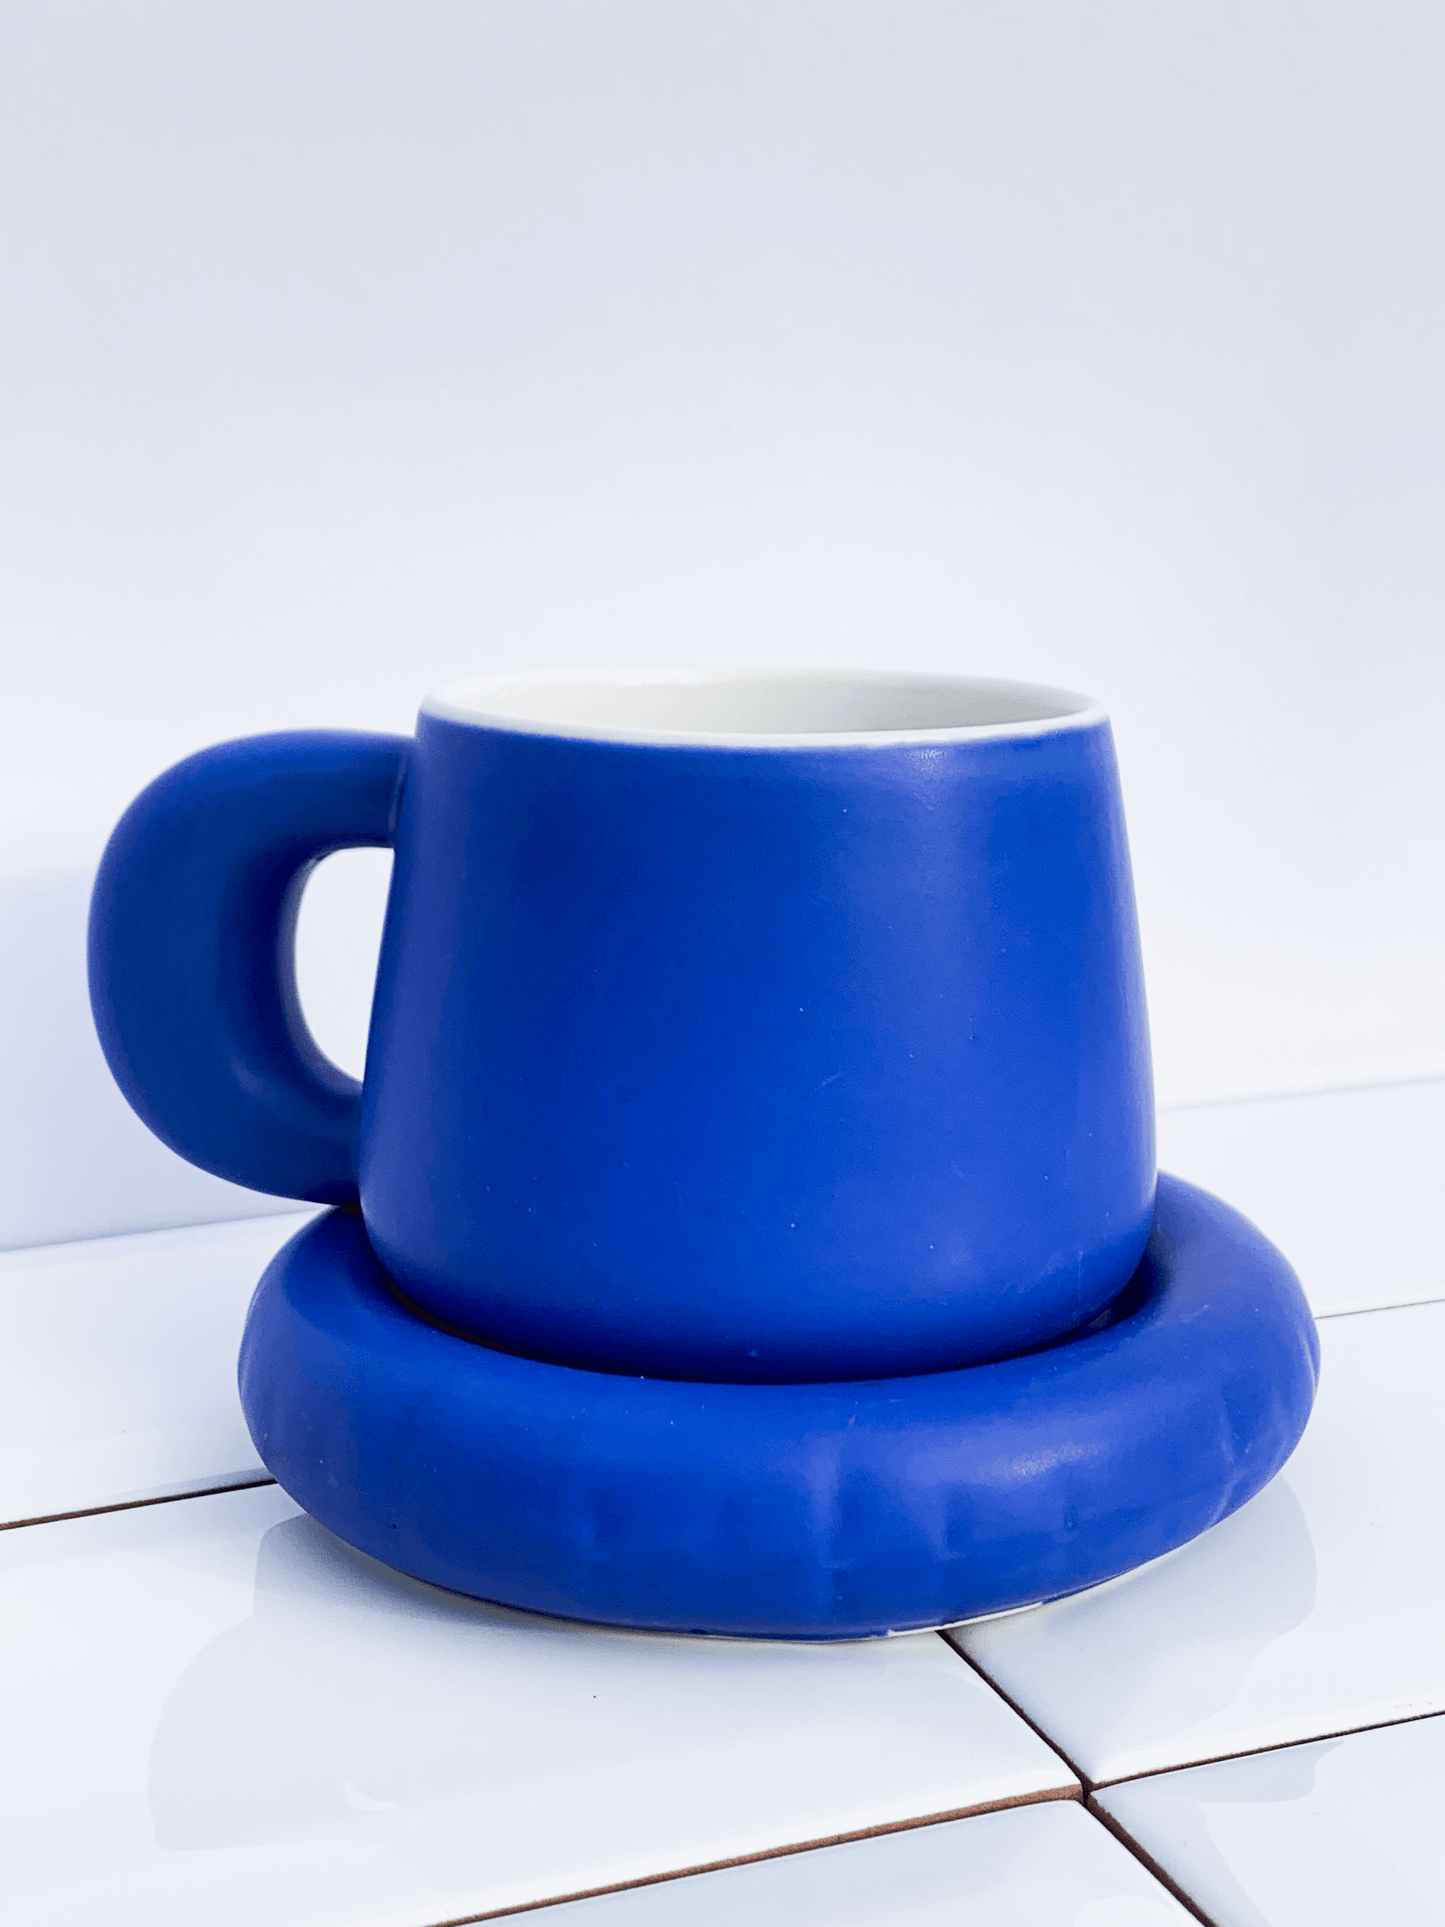 Blue ceramic coffee cup and saucer